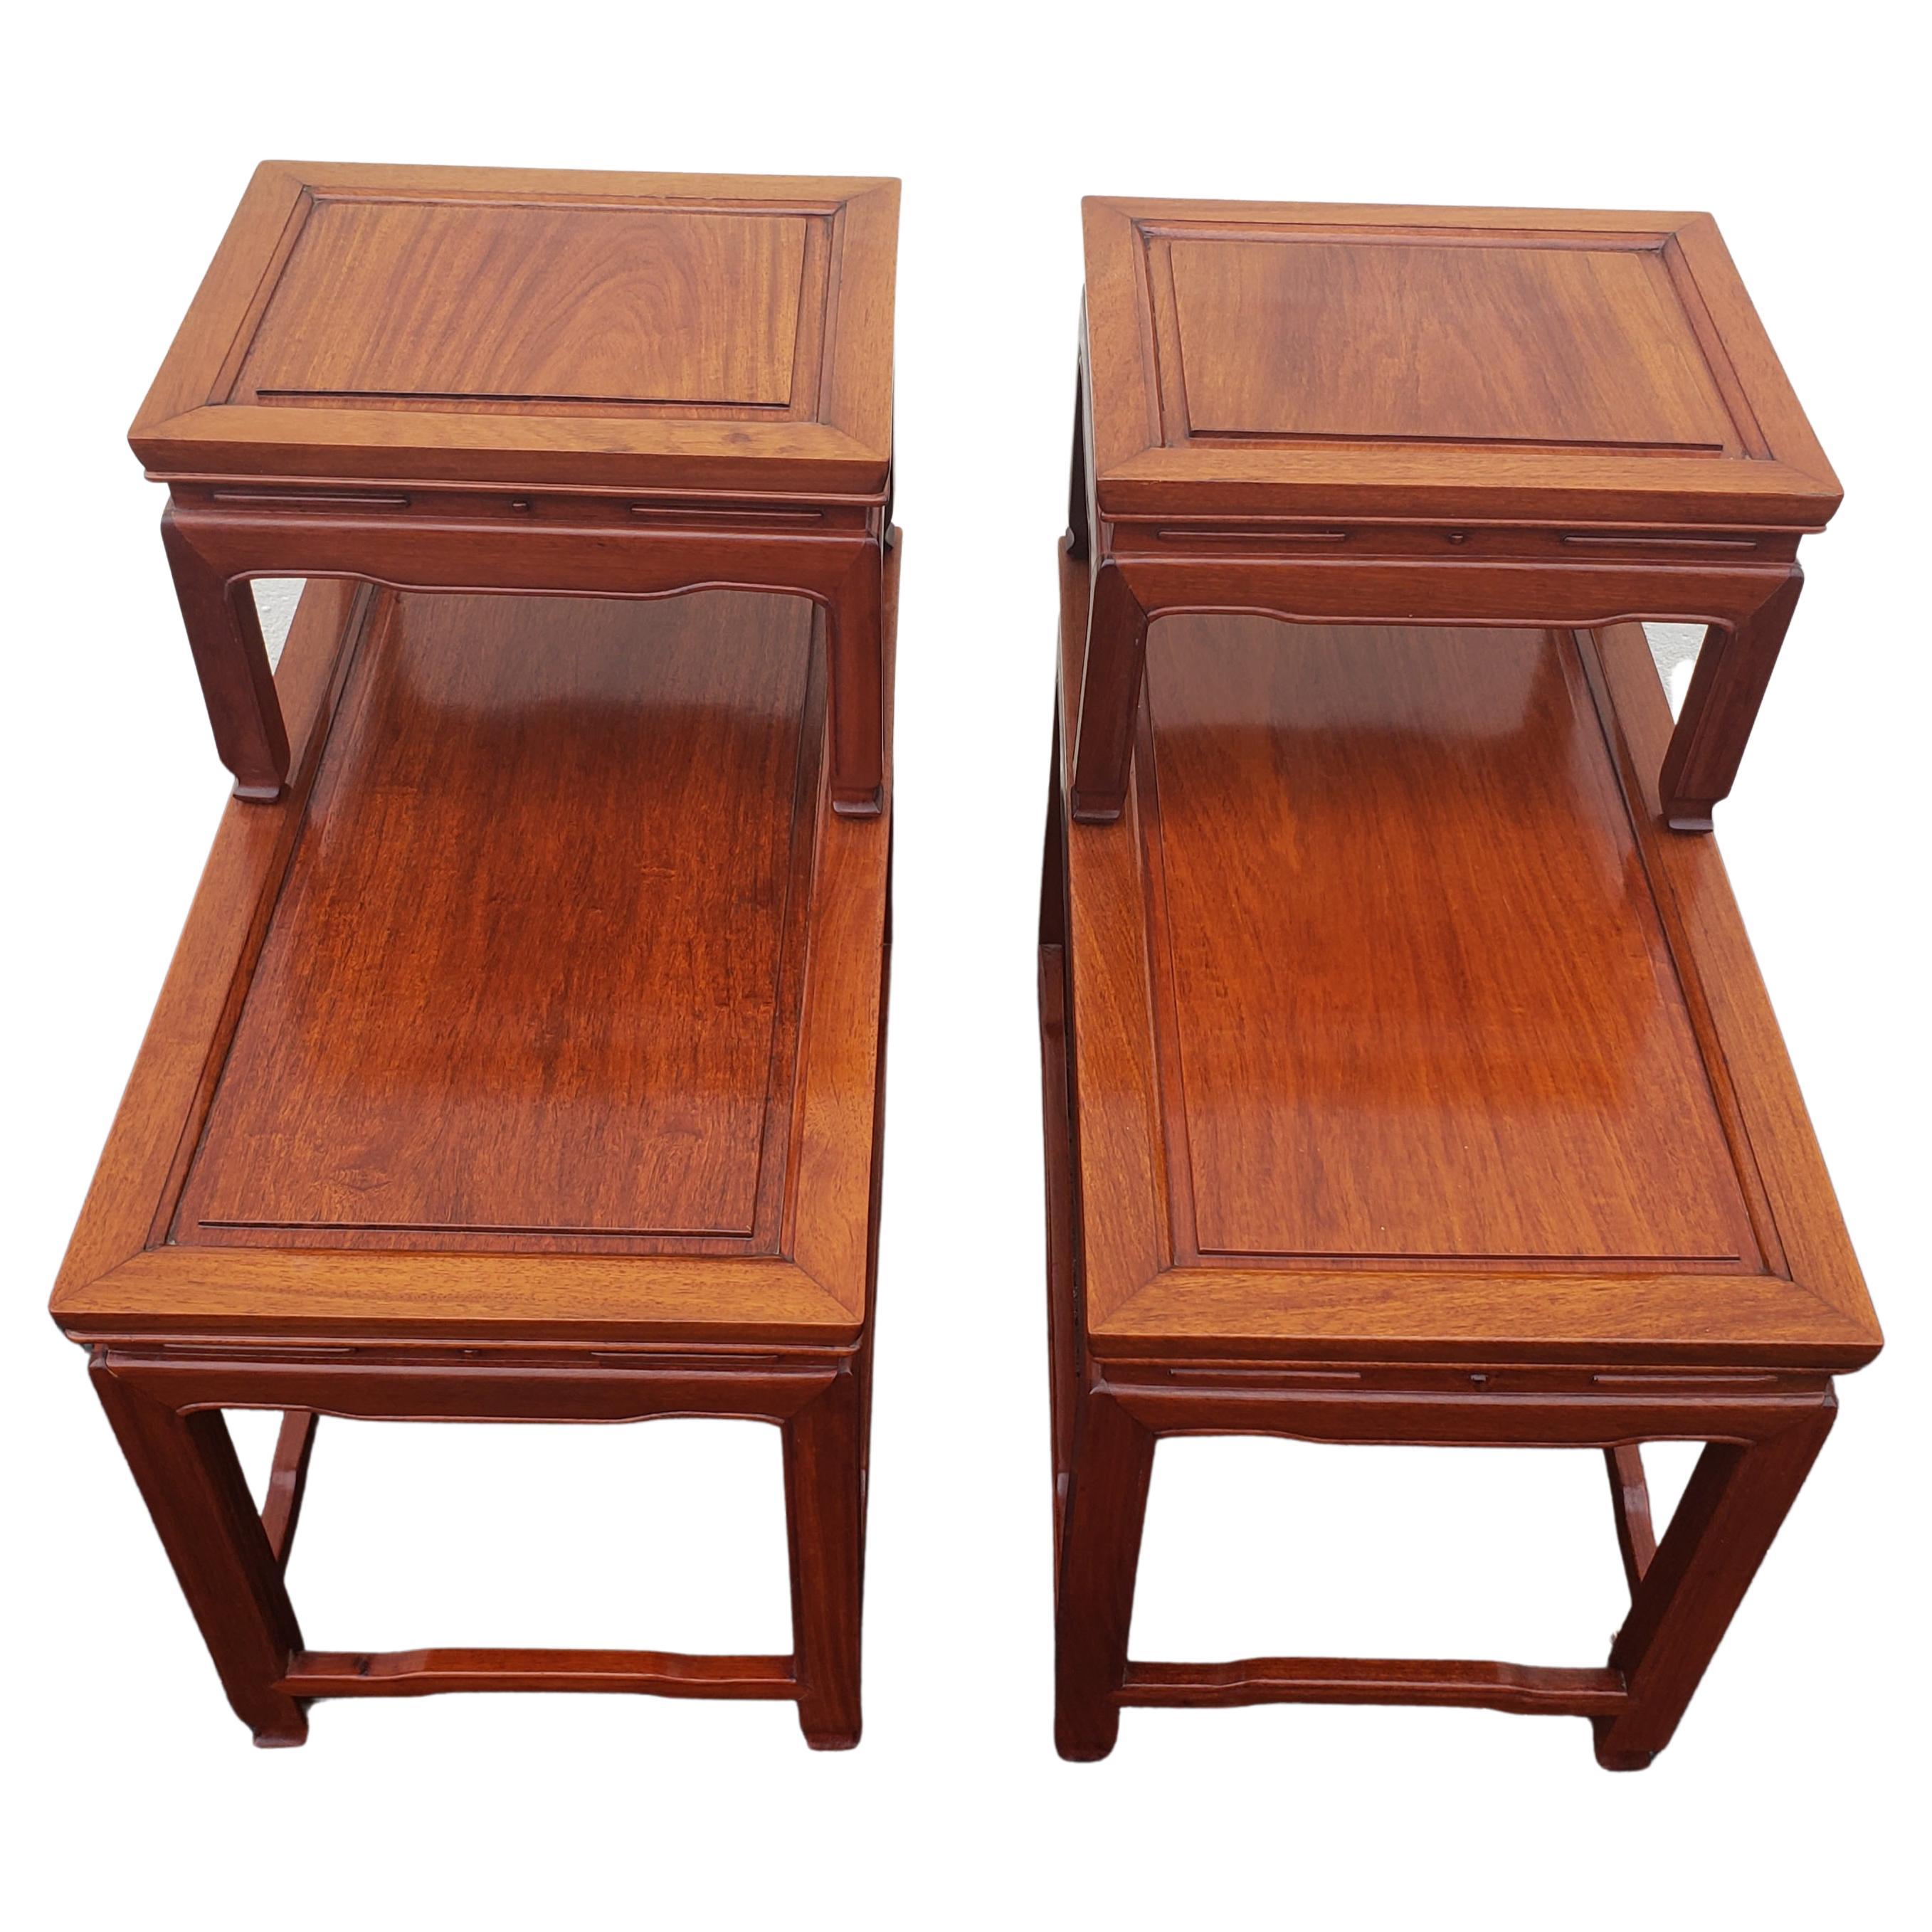 For your consideration is this fabulous pair of vintage Rosewood carved end tables, by George Zee.
 Stacked Ming style Chinese nightstands / end tables - hand crafted with kiln dried solid Rosewood.
Very well proportioned, great for smaller spaces